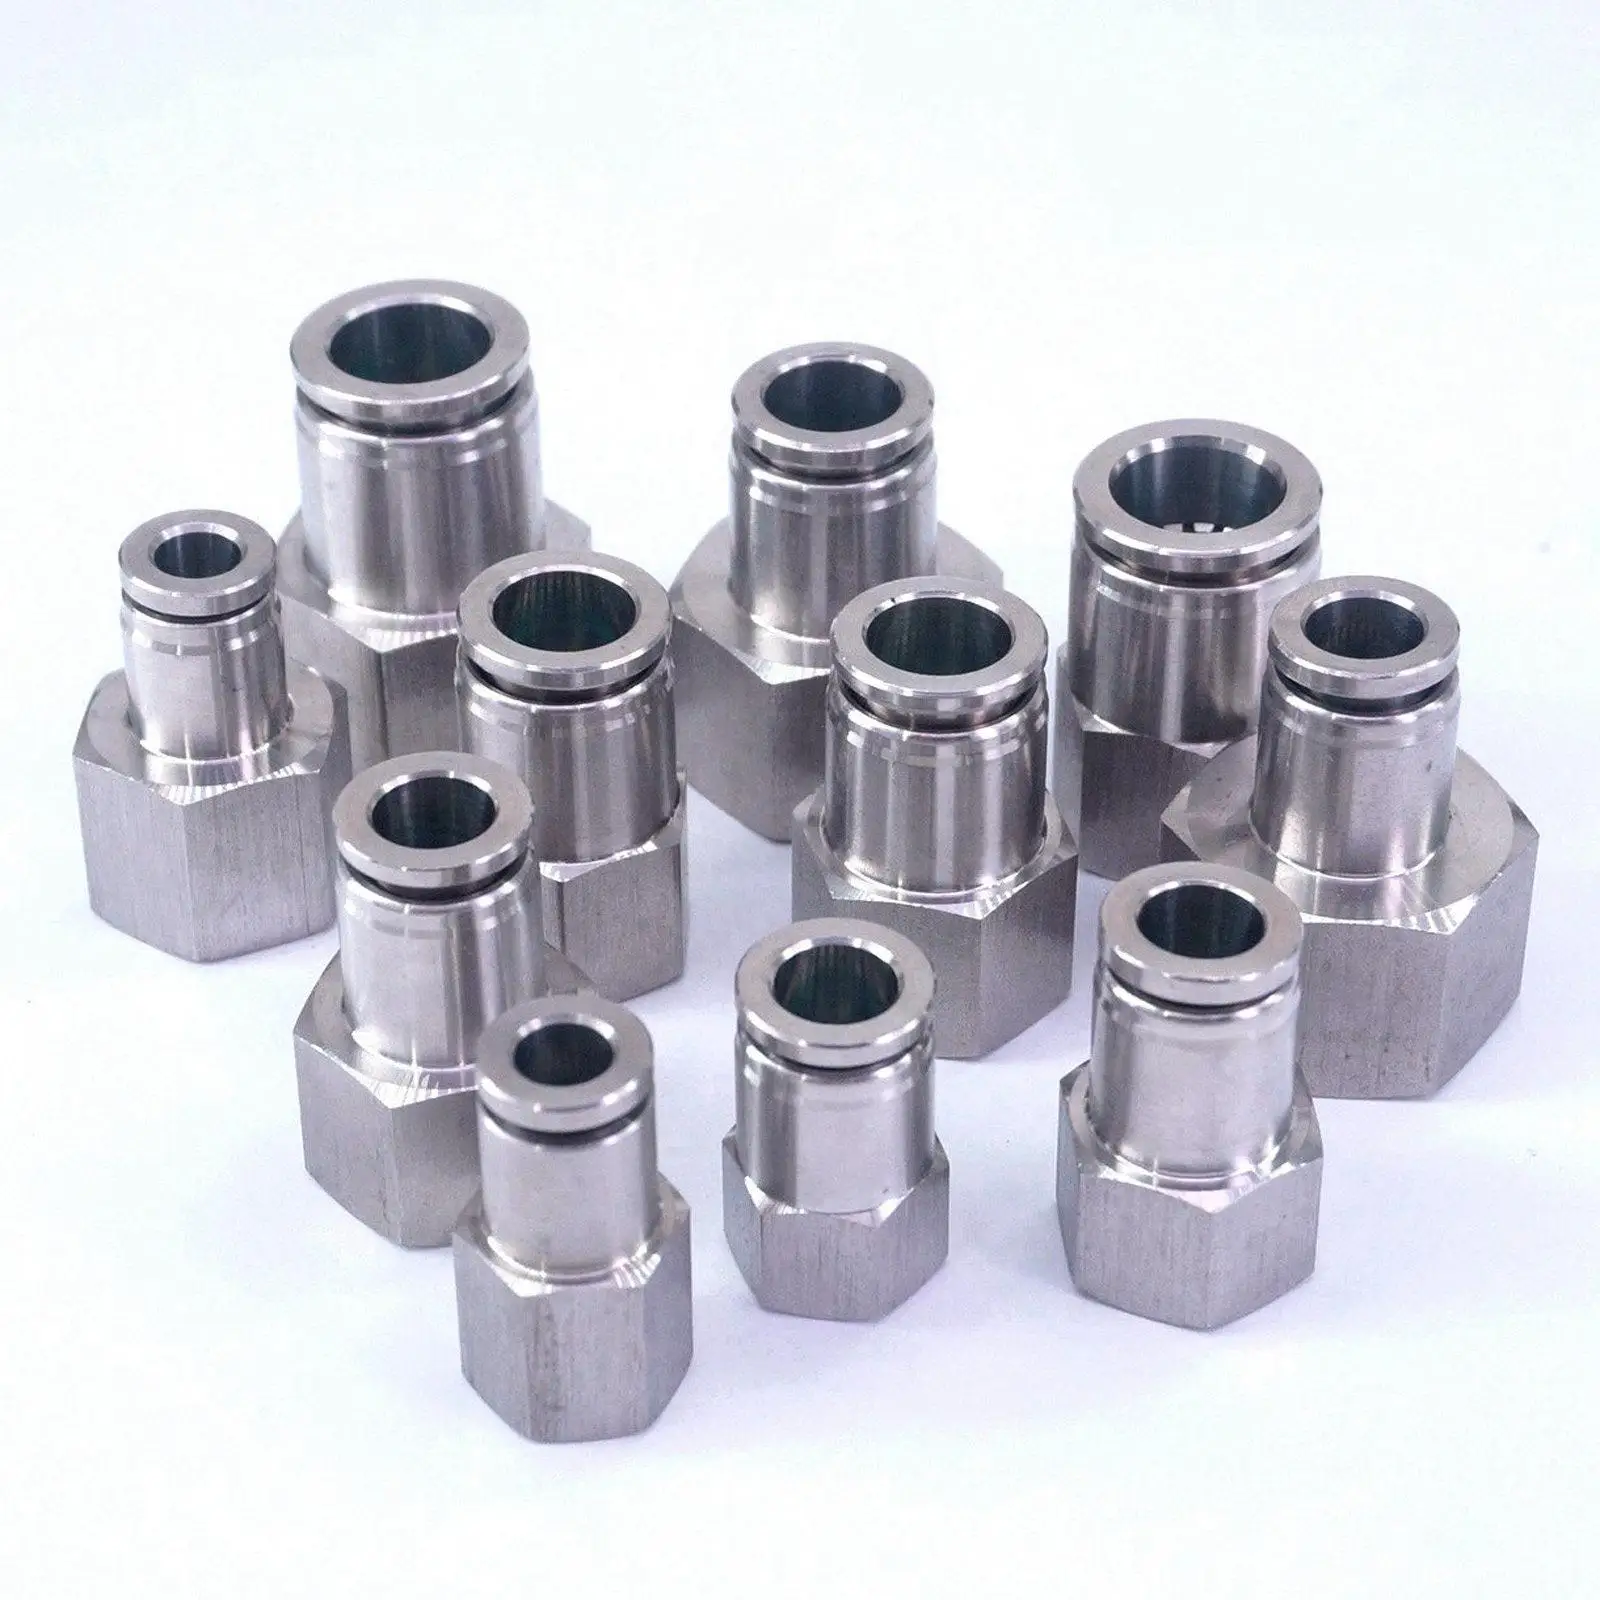 

Fit Tube O.D 4/6/8/10/12/16mm -1/8" 1/4" 3/8" 1/2" 3/4" BSP Female 304 Stainless Pneumatic Pushfit Fitting Anticorrosion